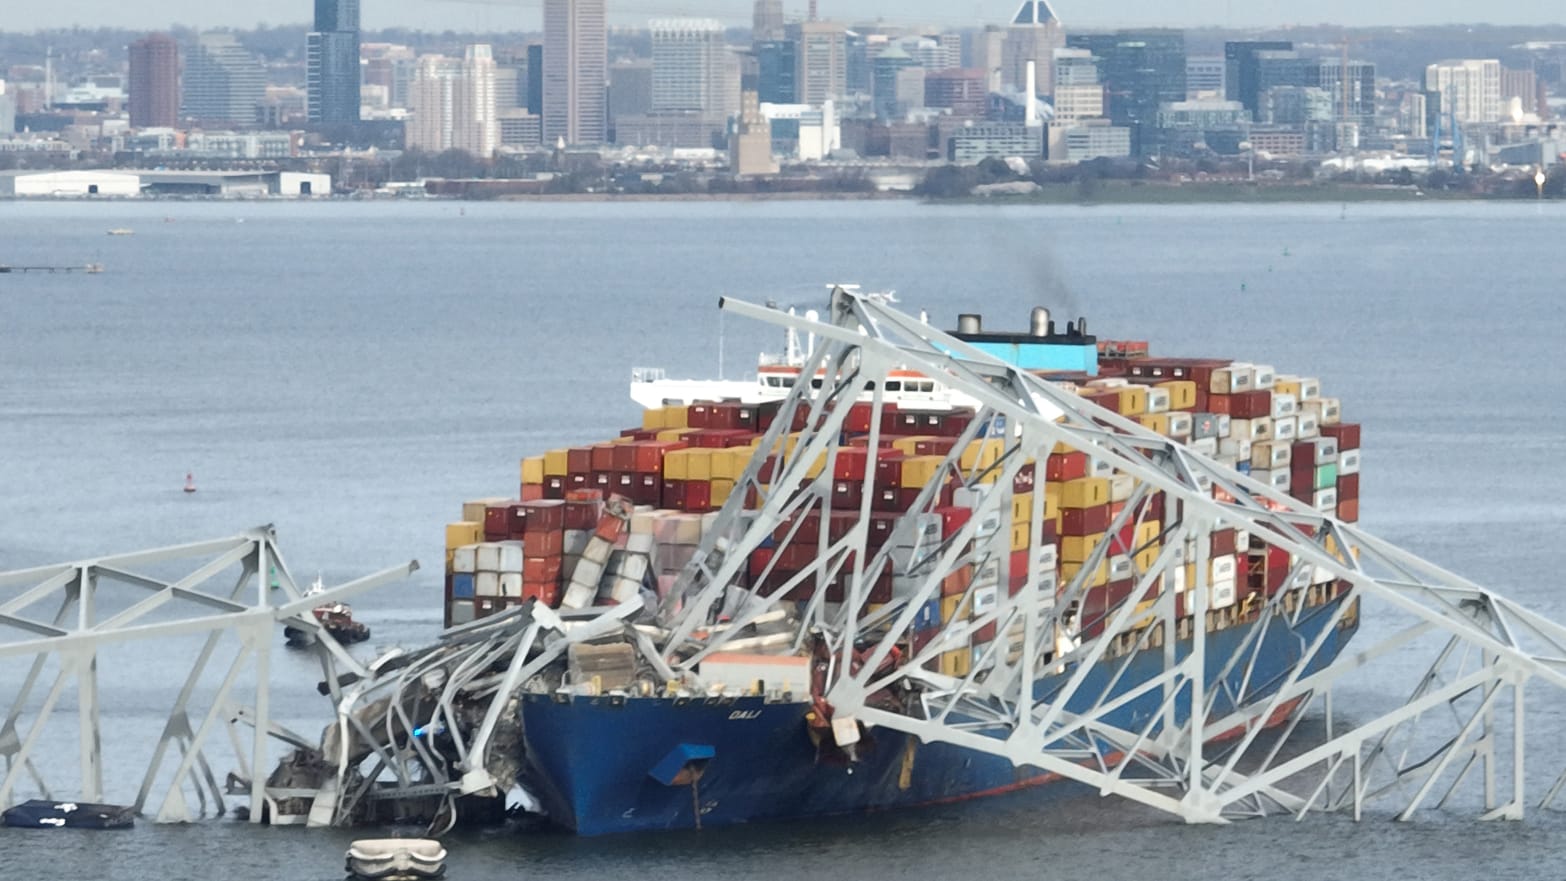 The frame of the Francis Scott Key bridge in Baltimore sits on top of the cargo ship Dali after the collapse.